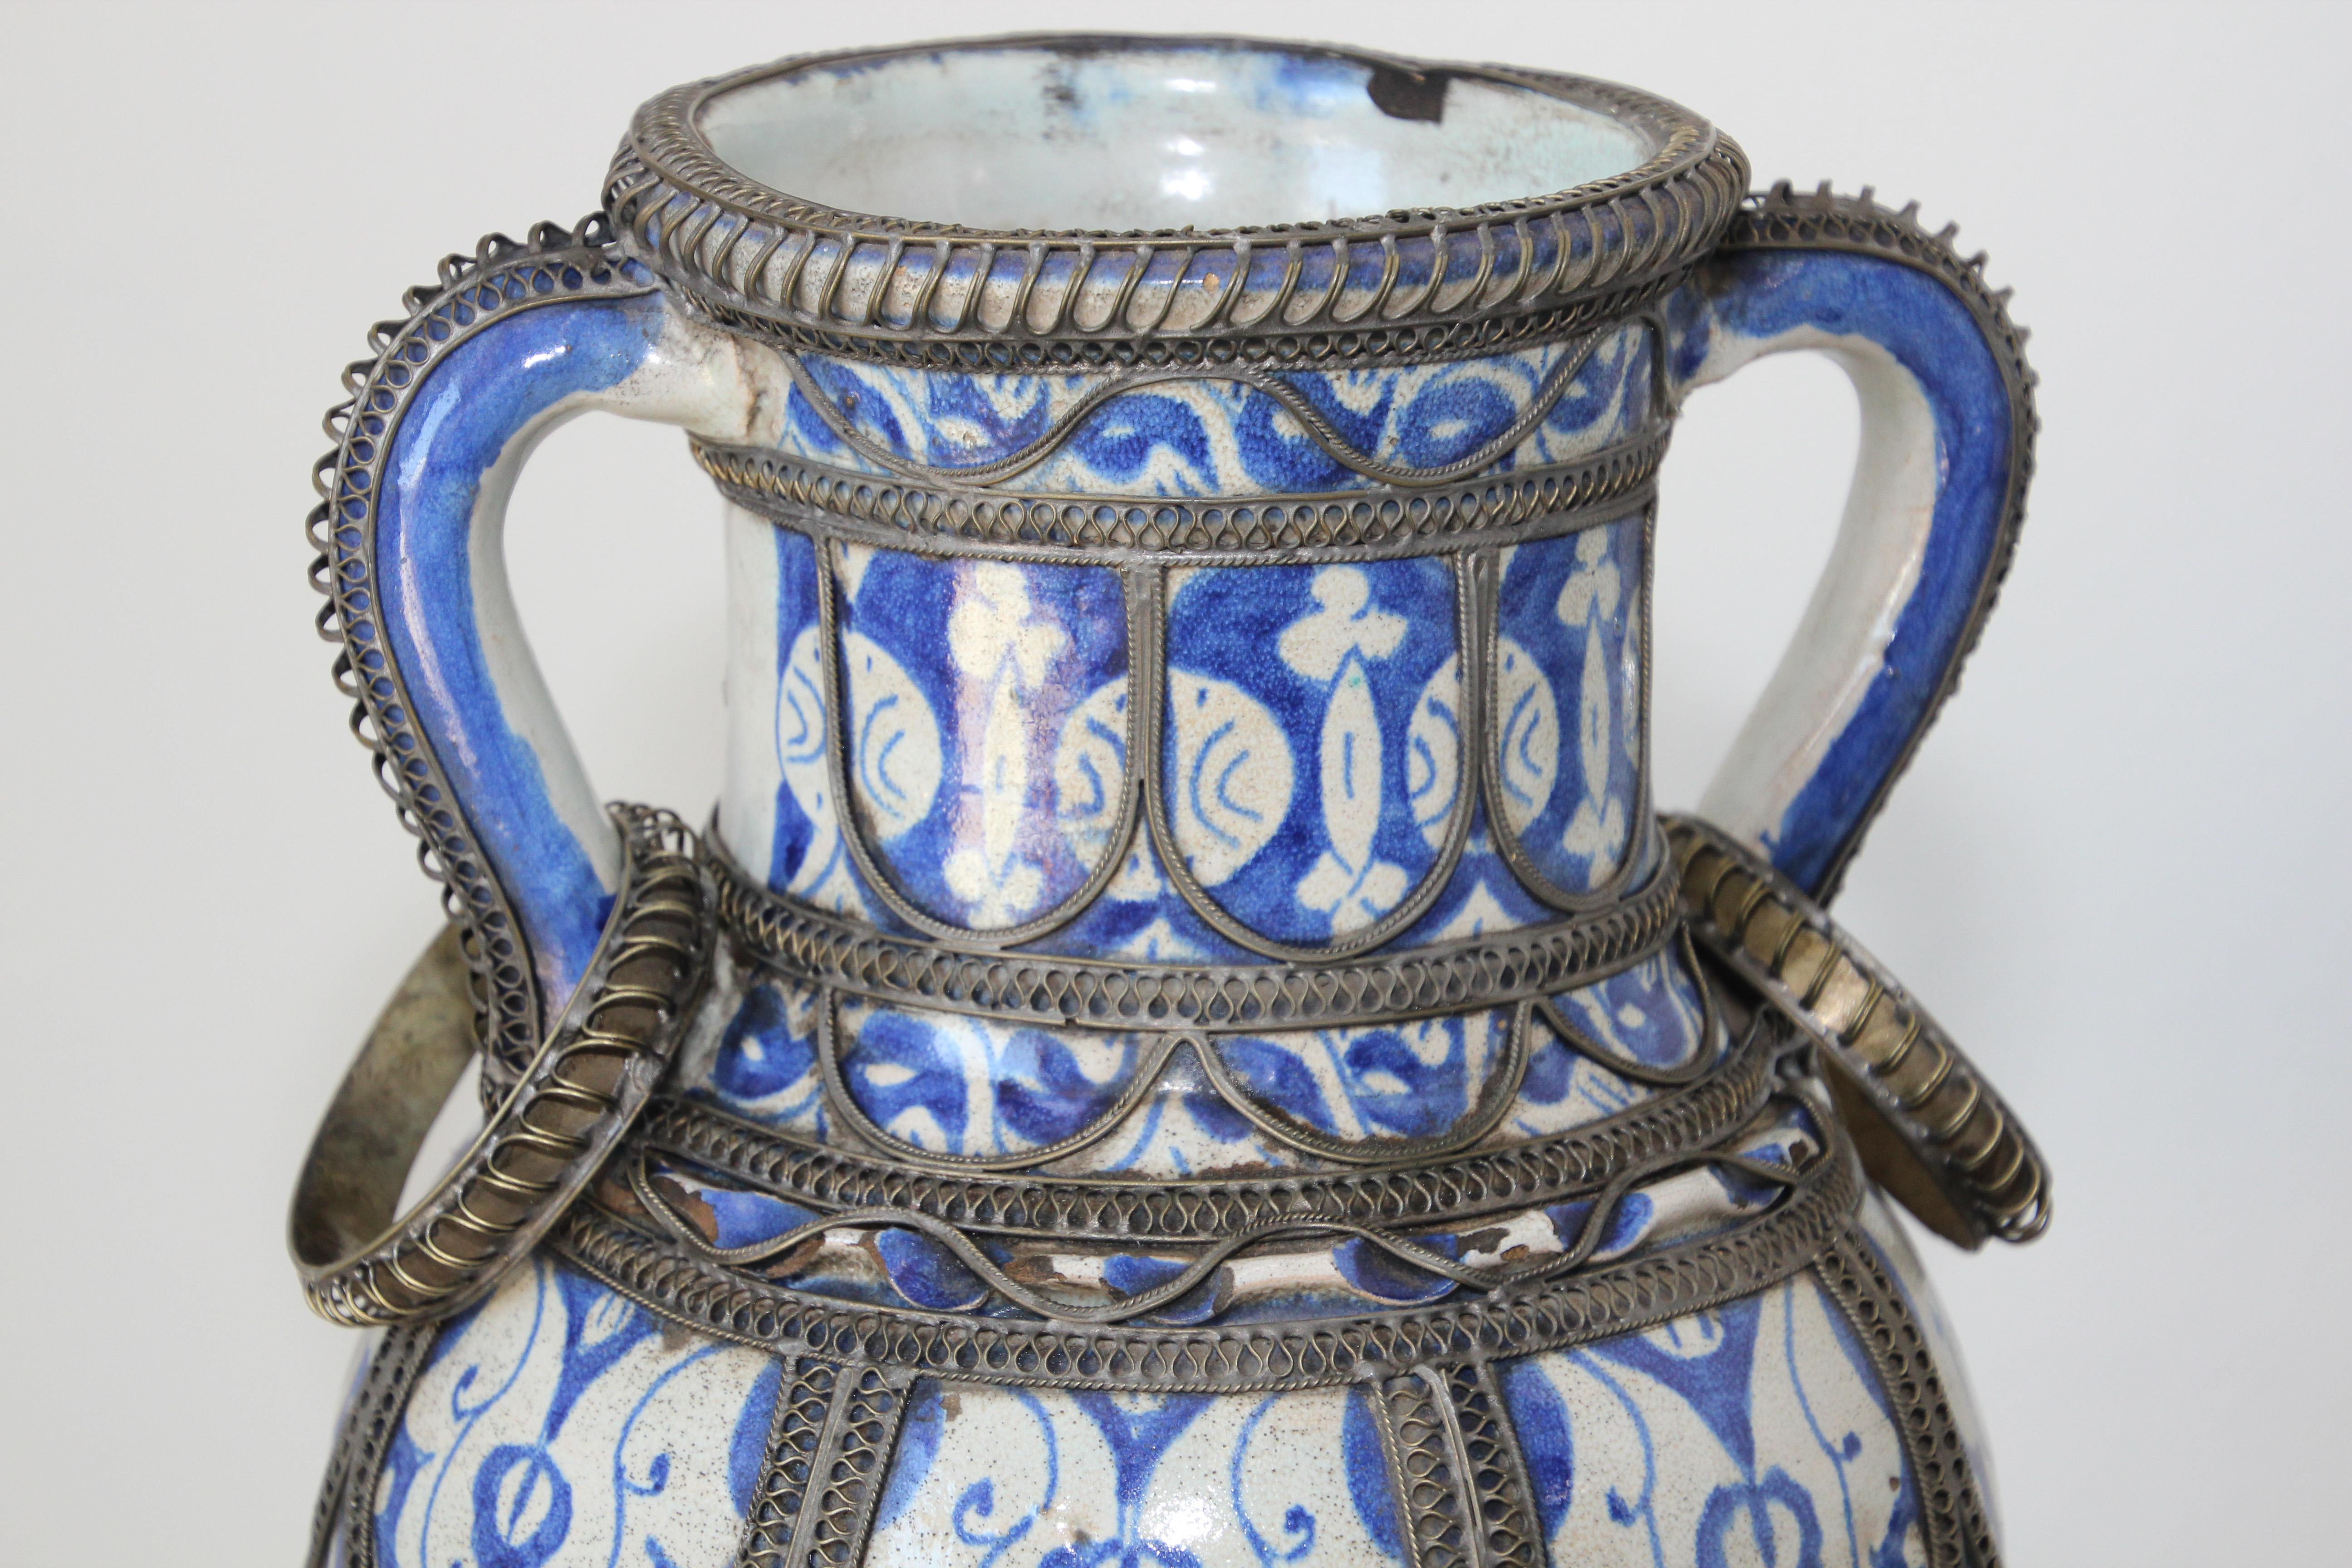  Moroccan Blue & White Ceramic Footed Vase from Fez with Silver Filigree For Sale 4